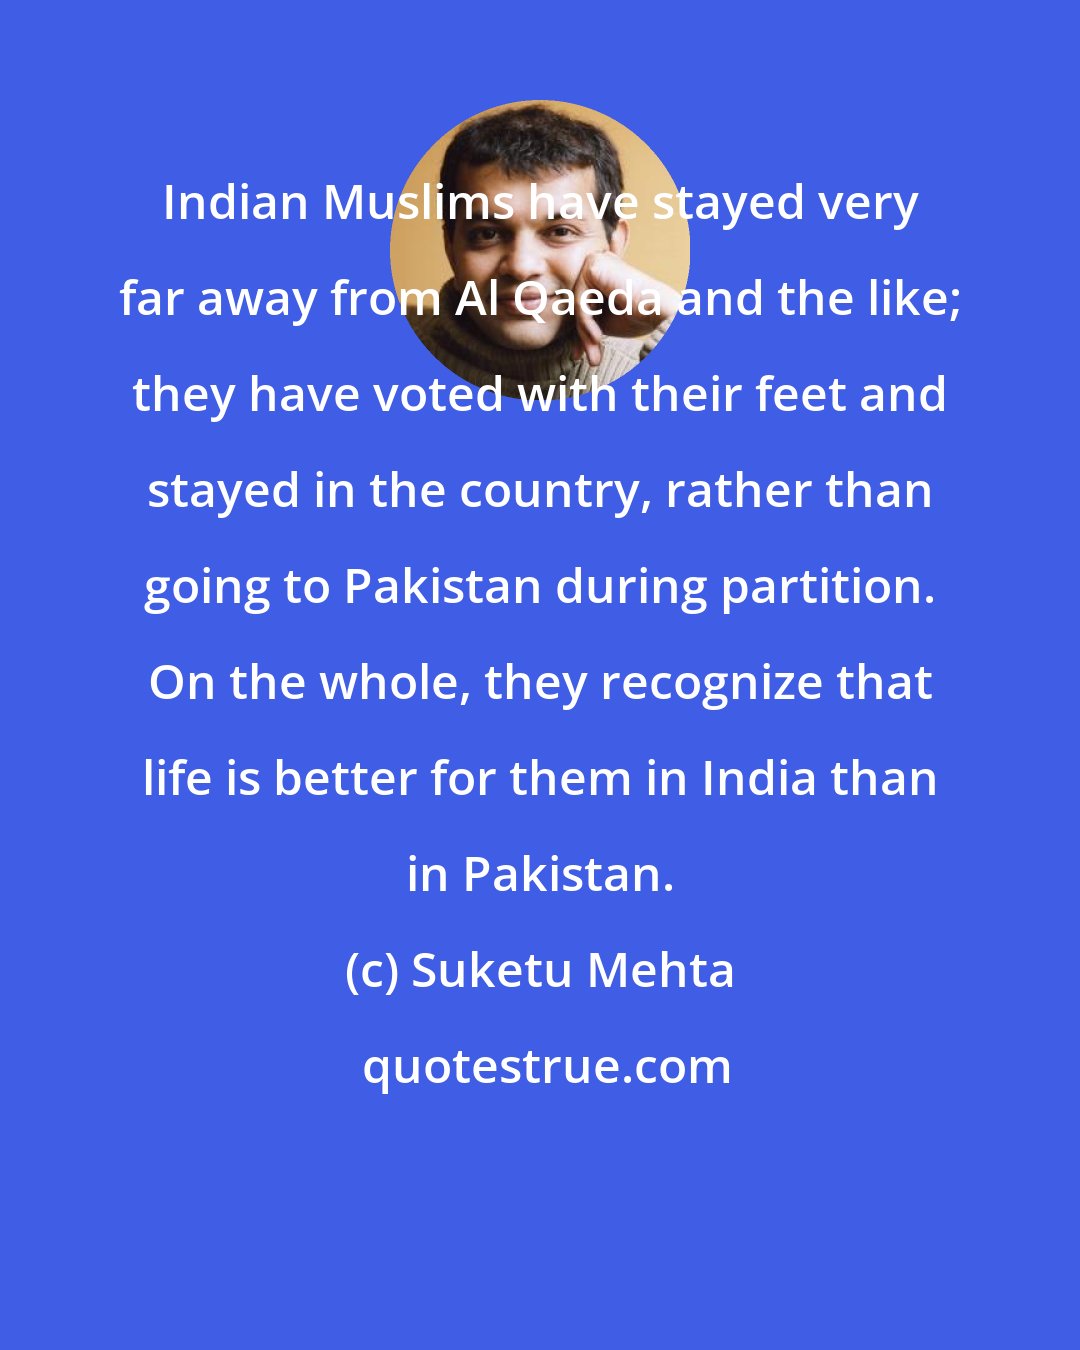 Suketu Mehta: Indian Muslims have stayed very far away from Al Qaeda and the like; they have voted with their feet and stayed in the country, rather than going to Pakistan during partition. On the whole, they recognize that life is better for them in India than in Pakistan.